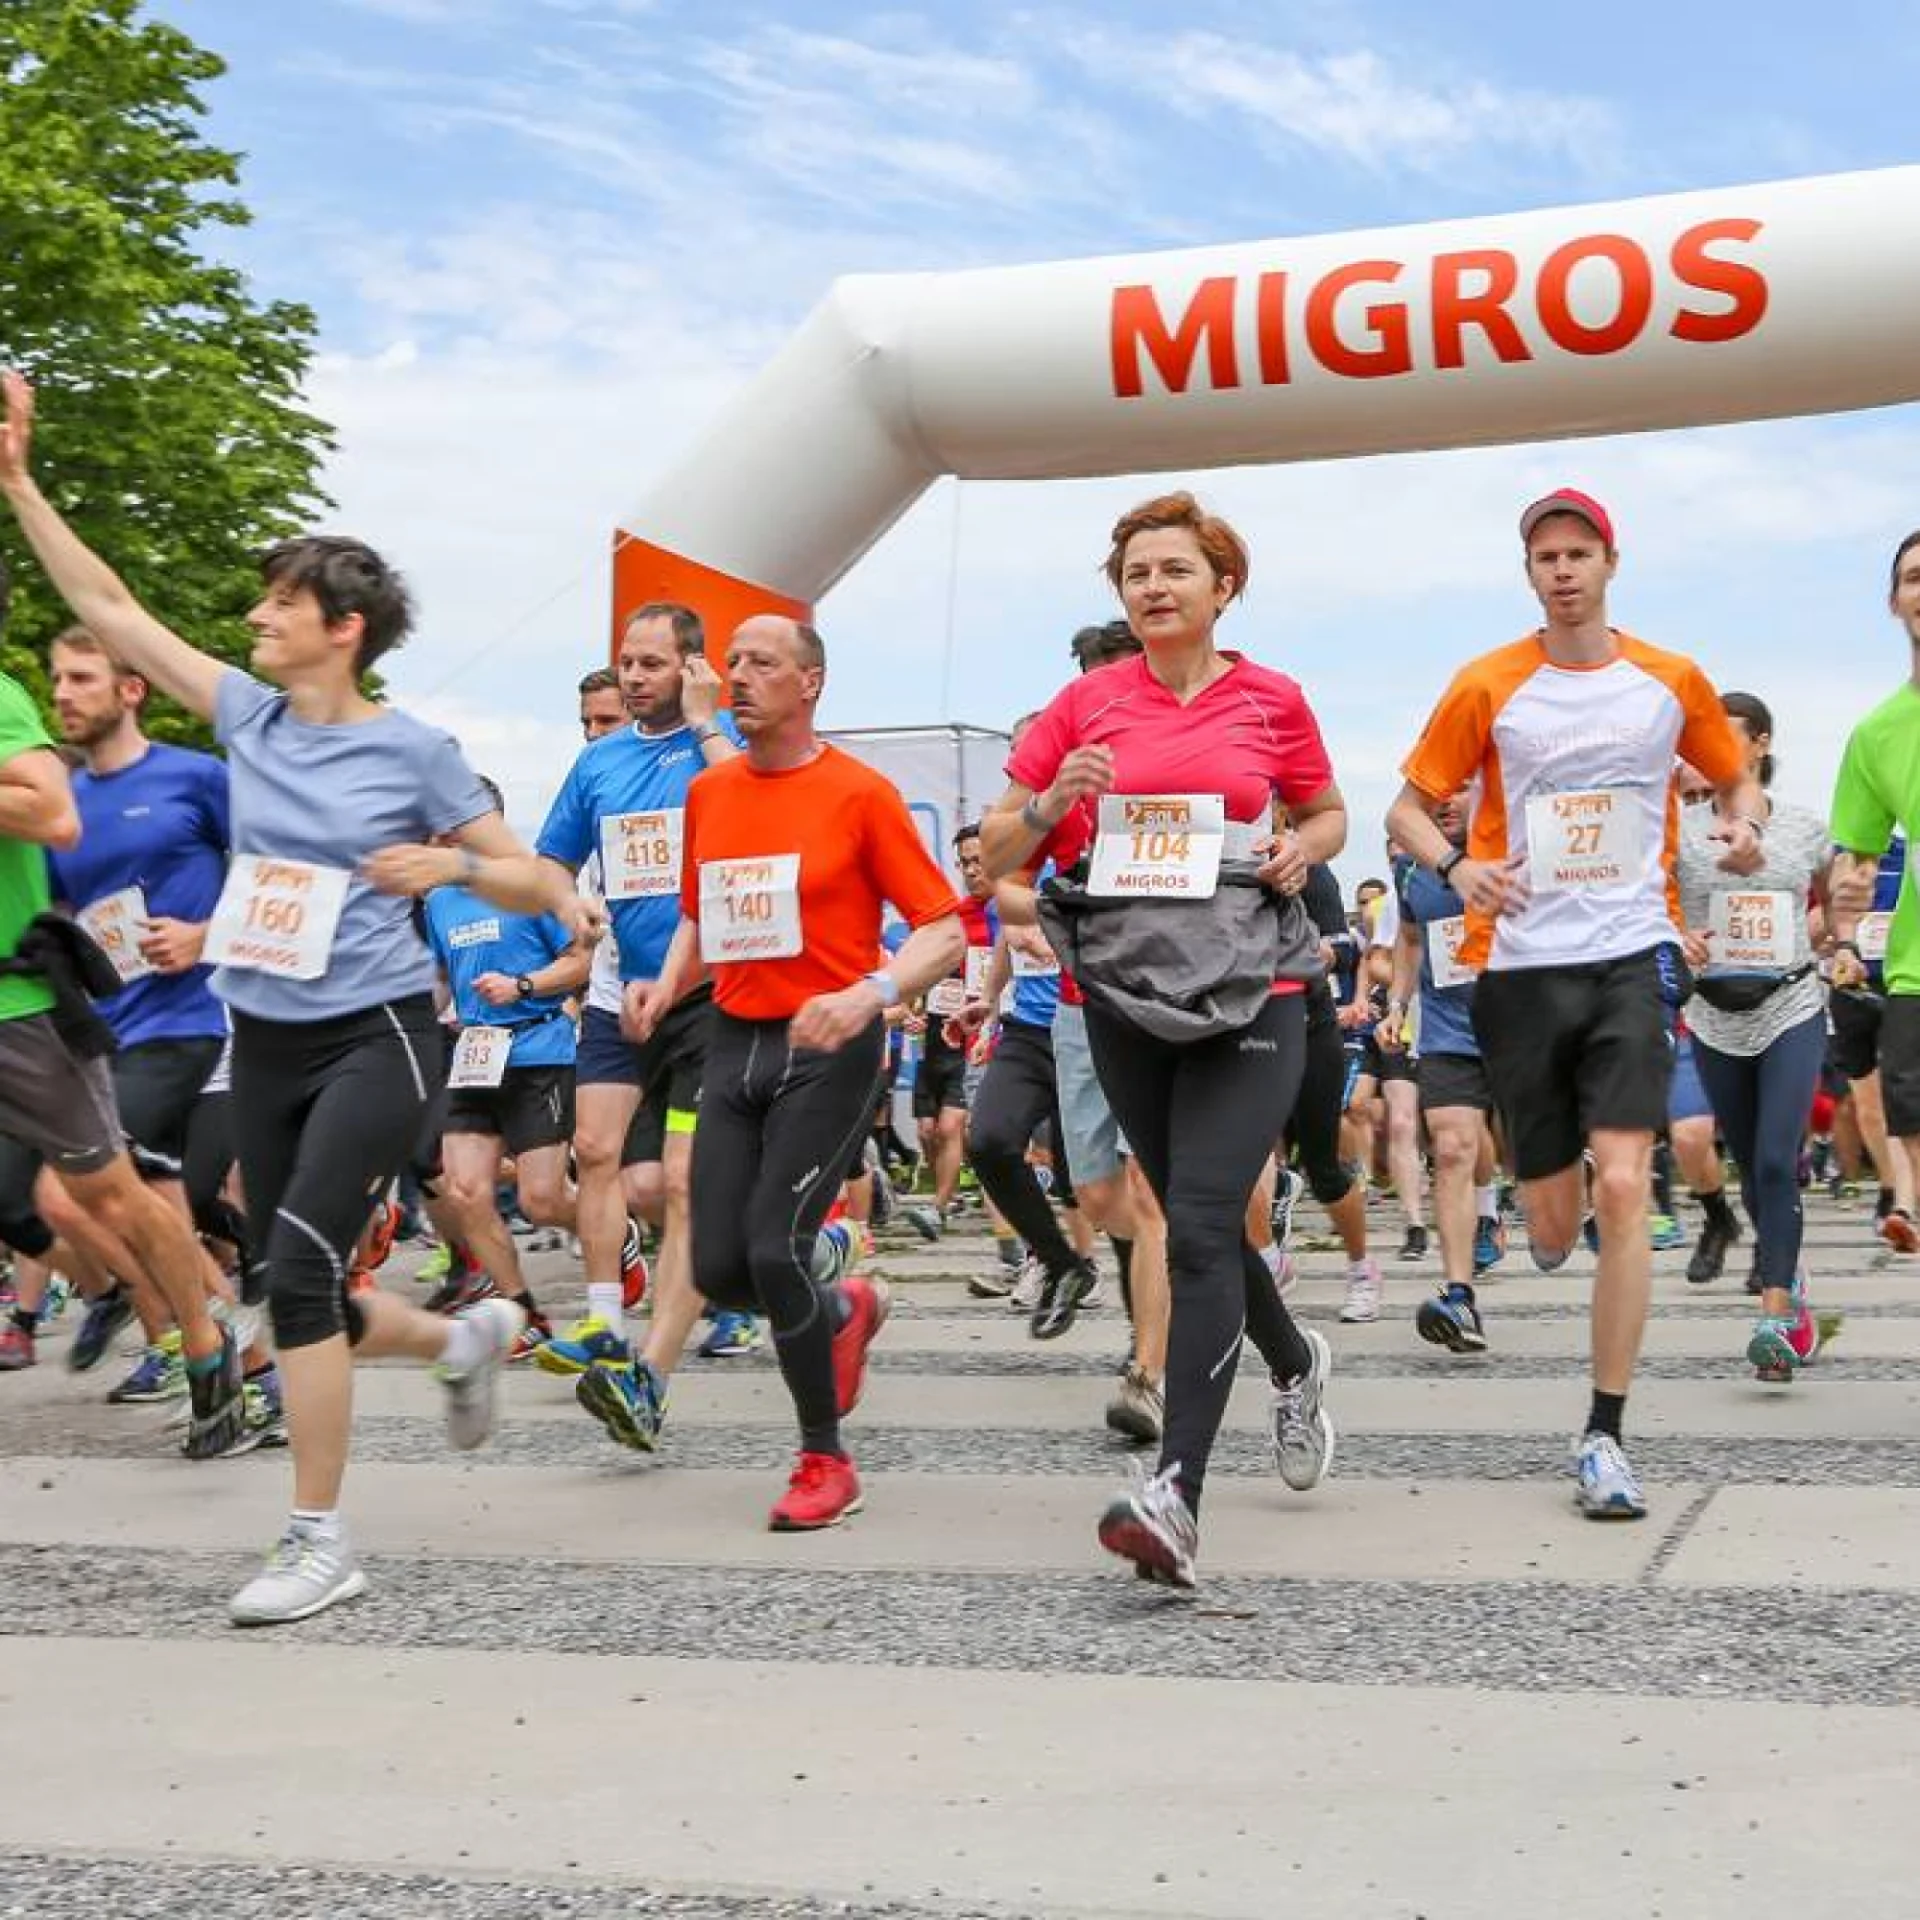 Runners shortly after the start of a fun run sponsored by Migros